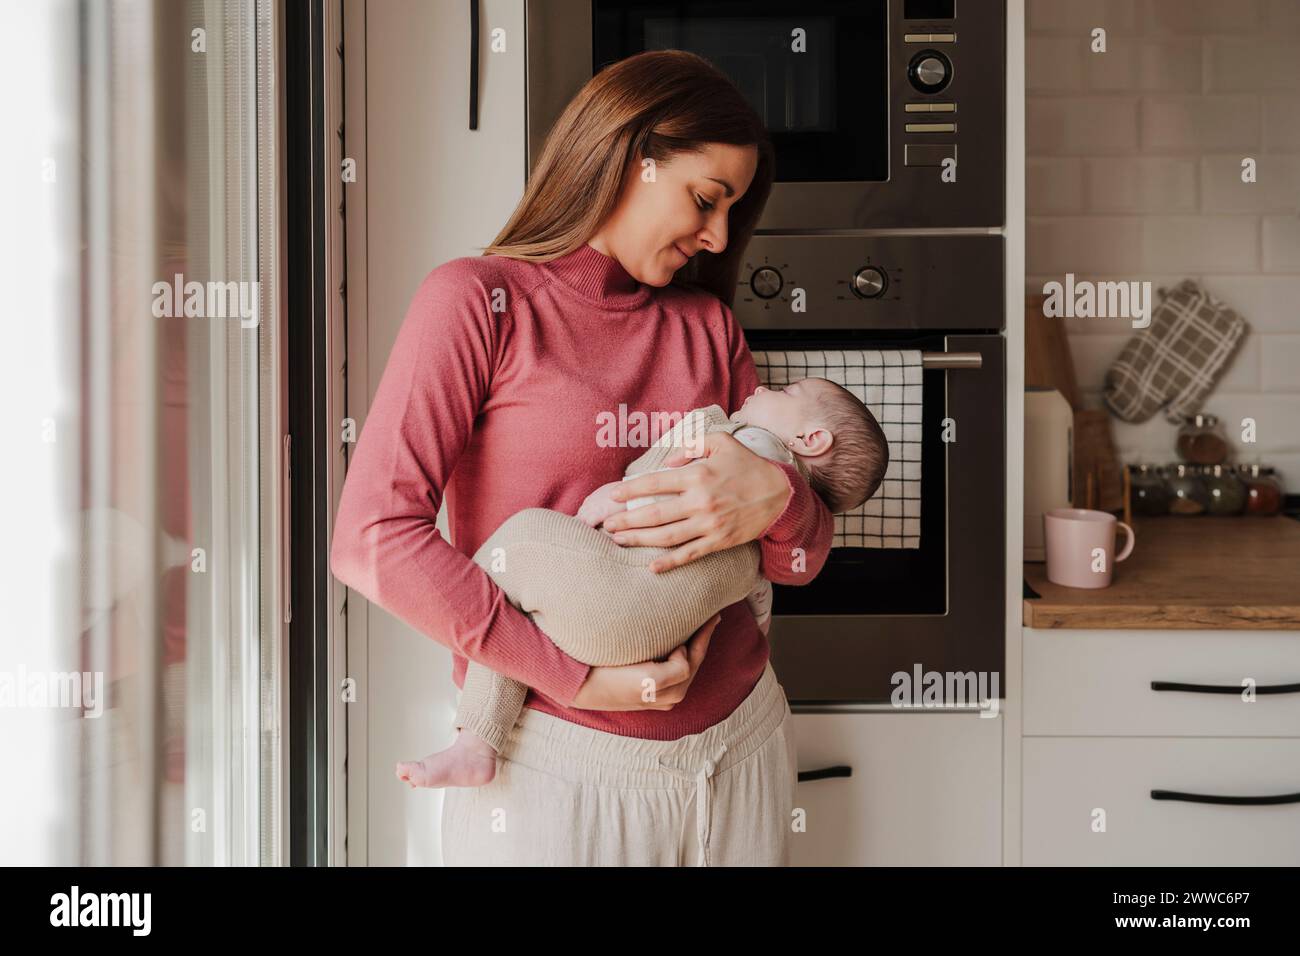 Smiling woman holding baby daughter in kitchen Stock Photo